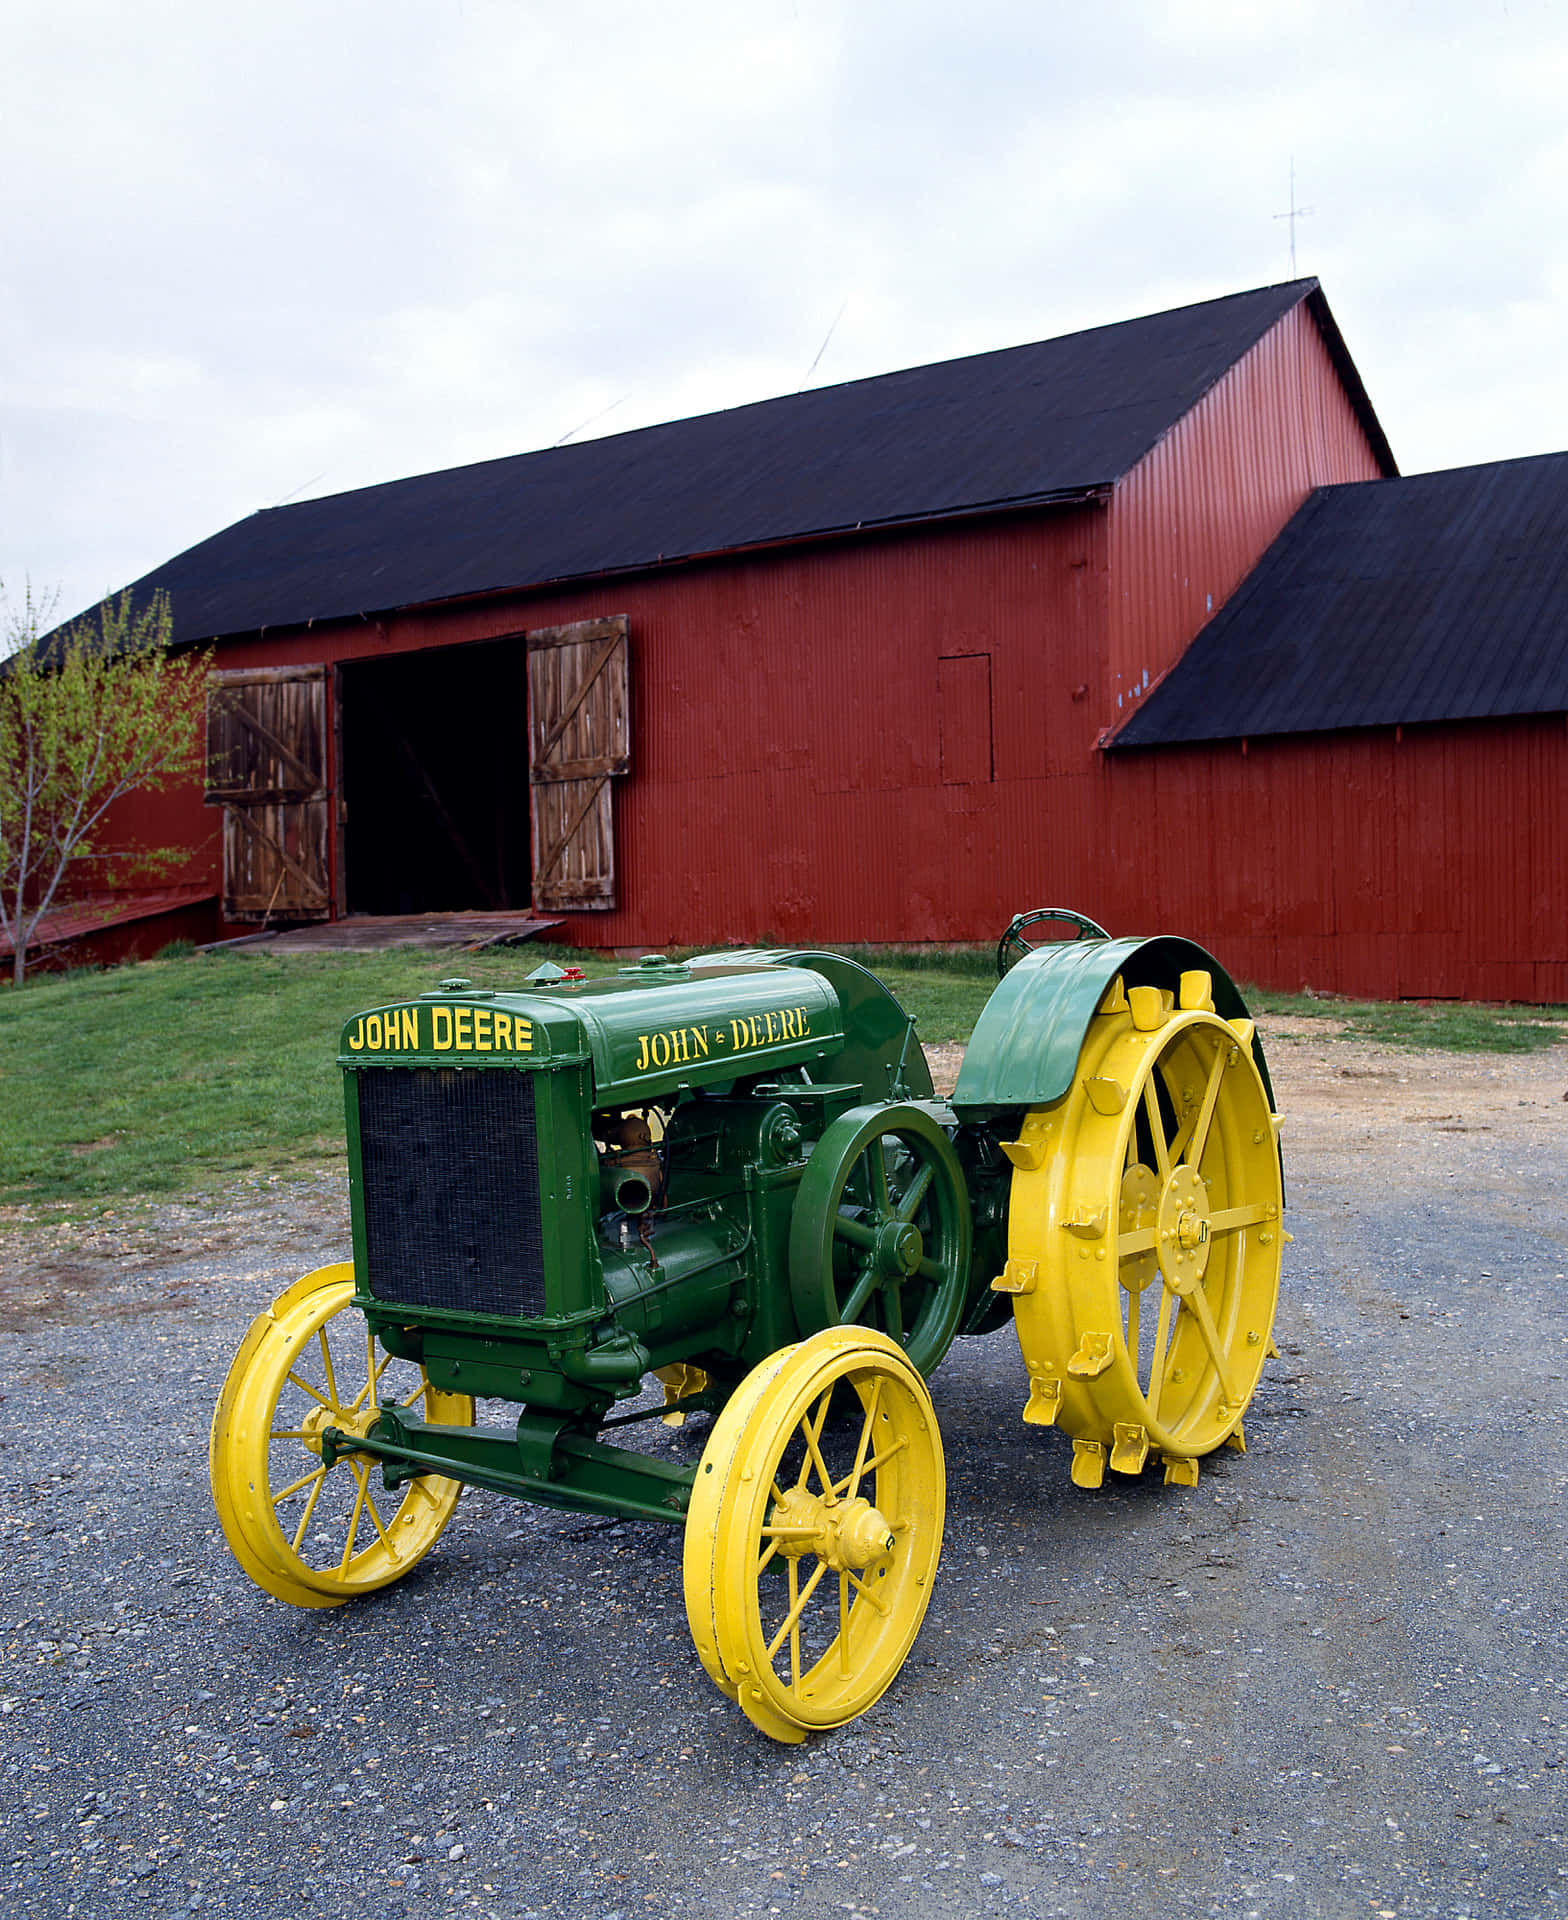 A close-up view of a classic John Deere tractor in the field